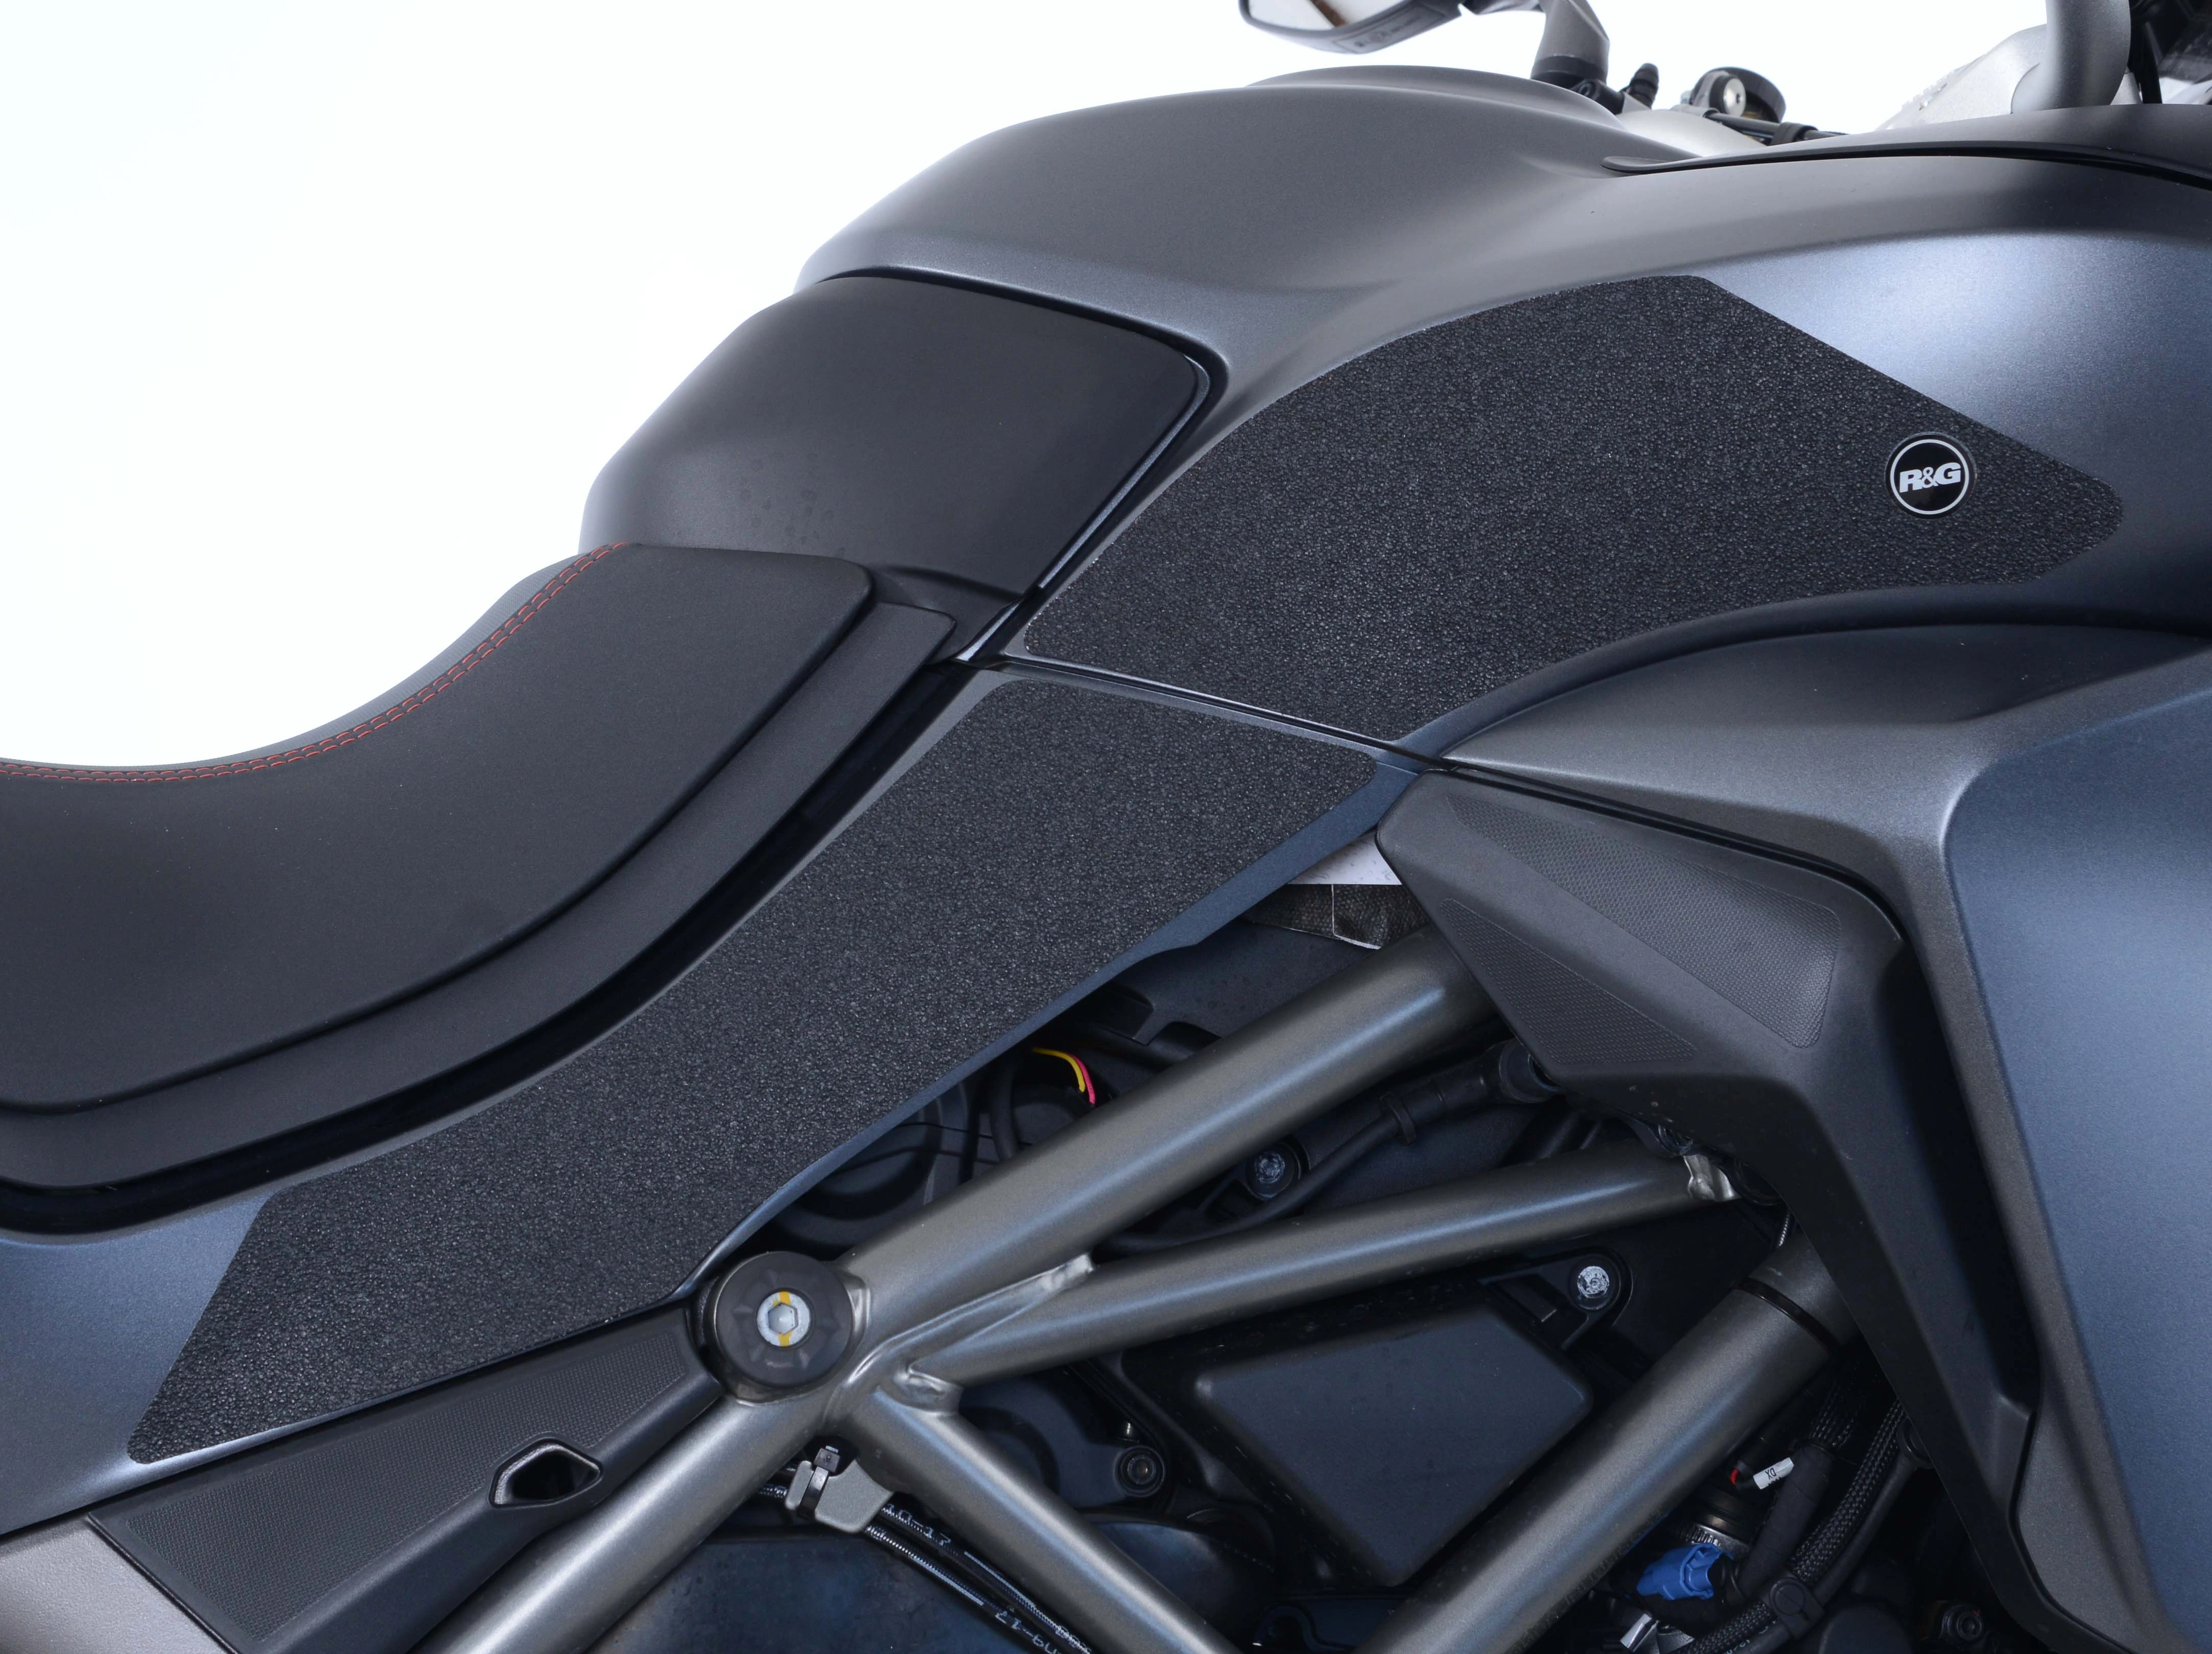 R&G Tank Traction Grips for Ducati Multistrada 1260, 1260S, 1260 D-AIR and 1260 Pikes Peak '18- models.